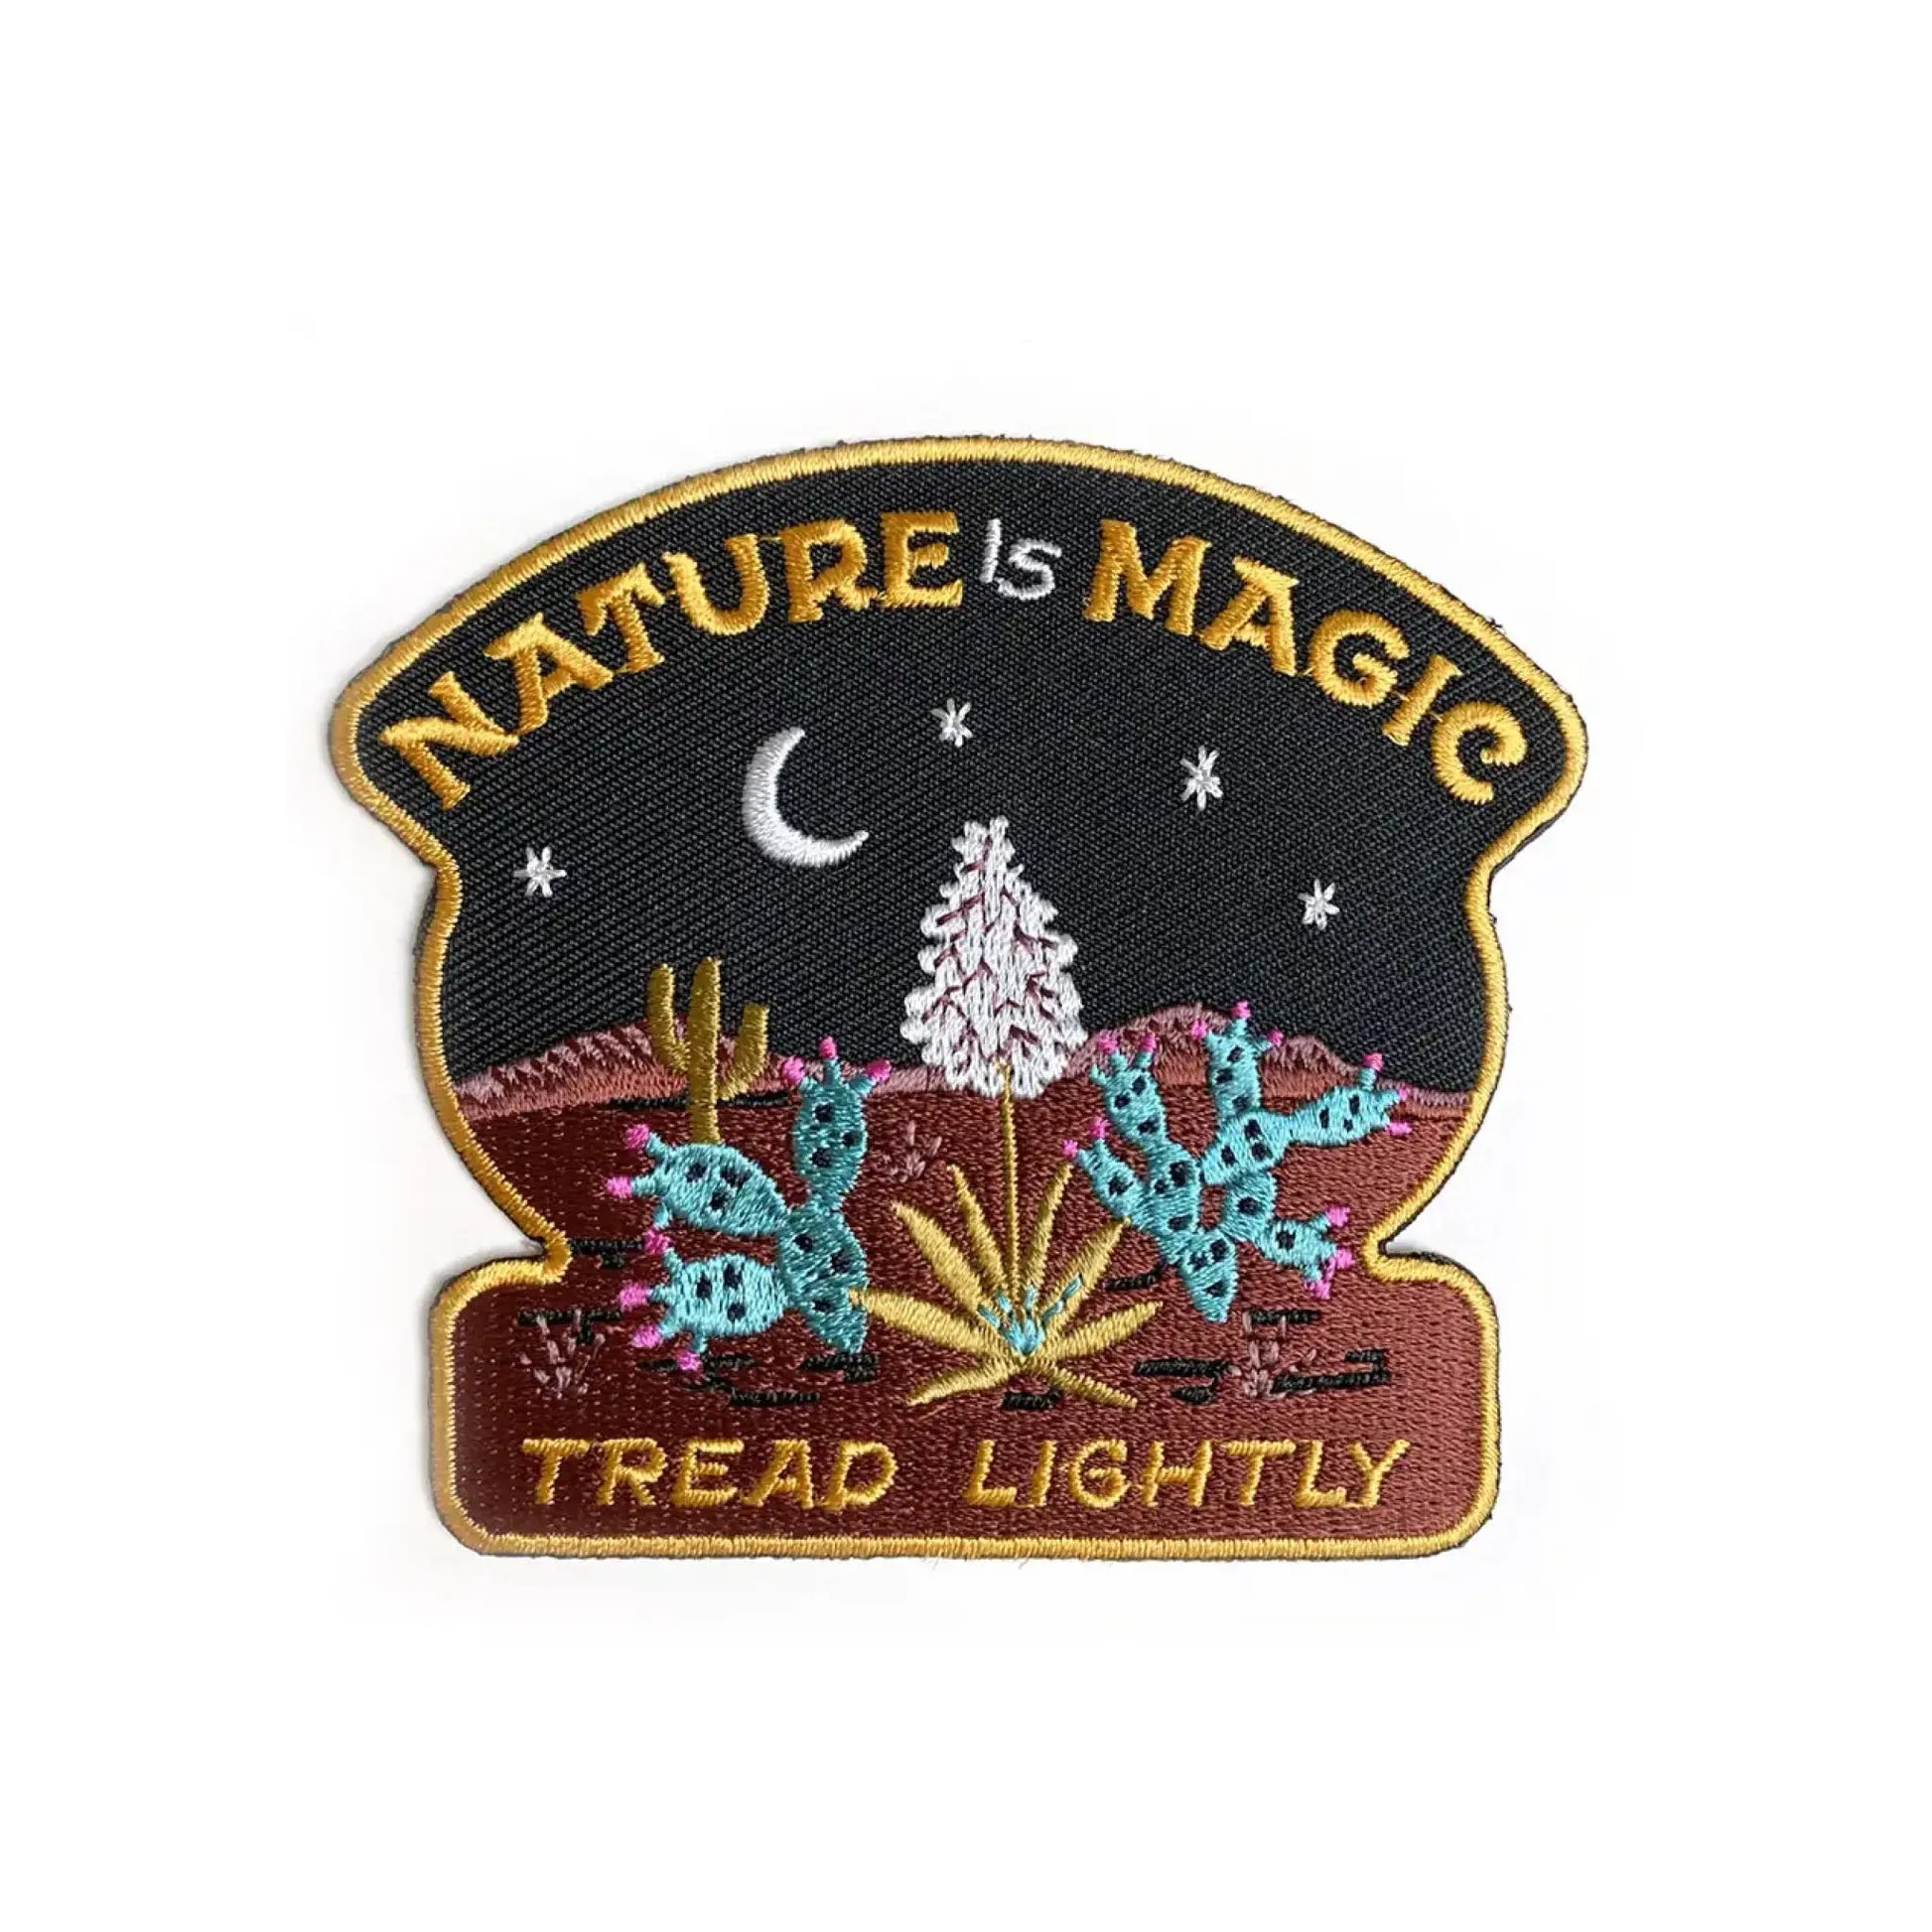 Nature is Magic Tread Lightly iron on patch - Patch